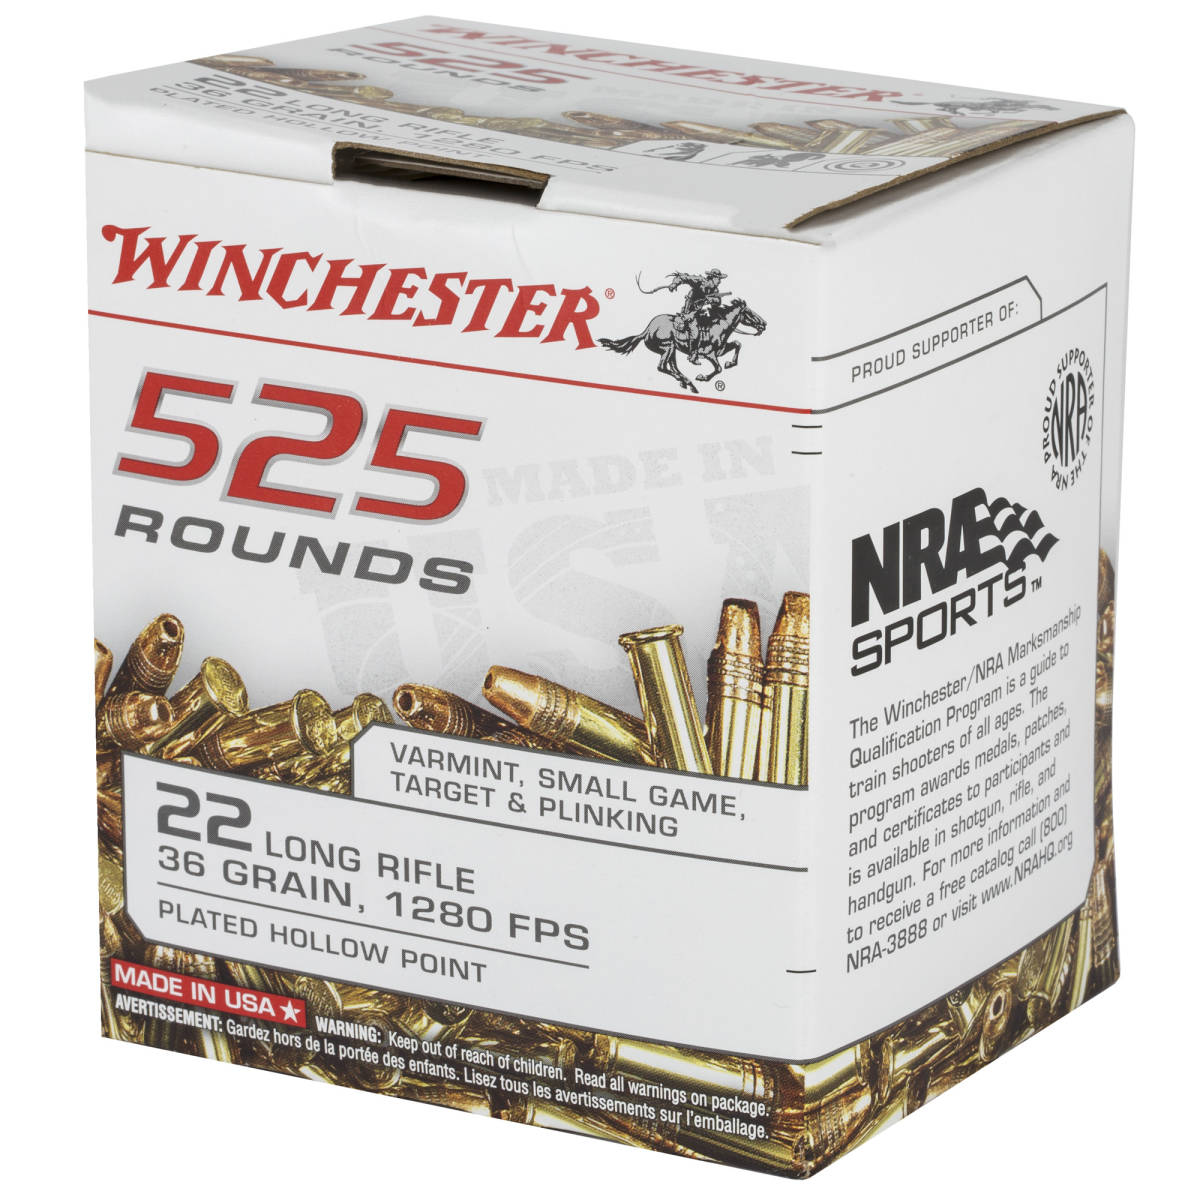 525 ROUNDS WINCHESTER 22LR 36 GR CP HOLLOW POINT 22 LR AMMO AMMUNITION-img-2